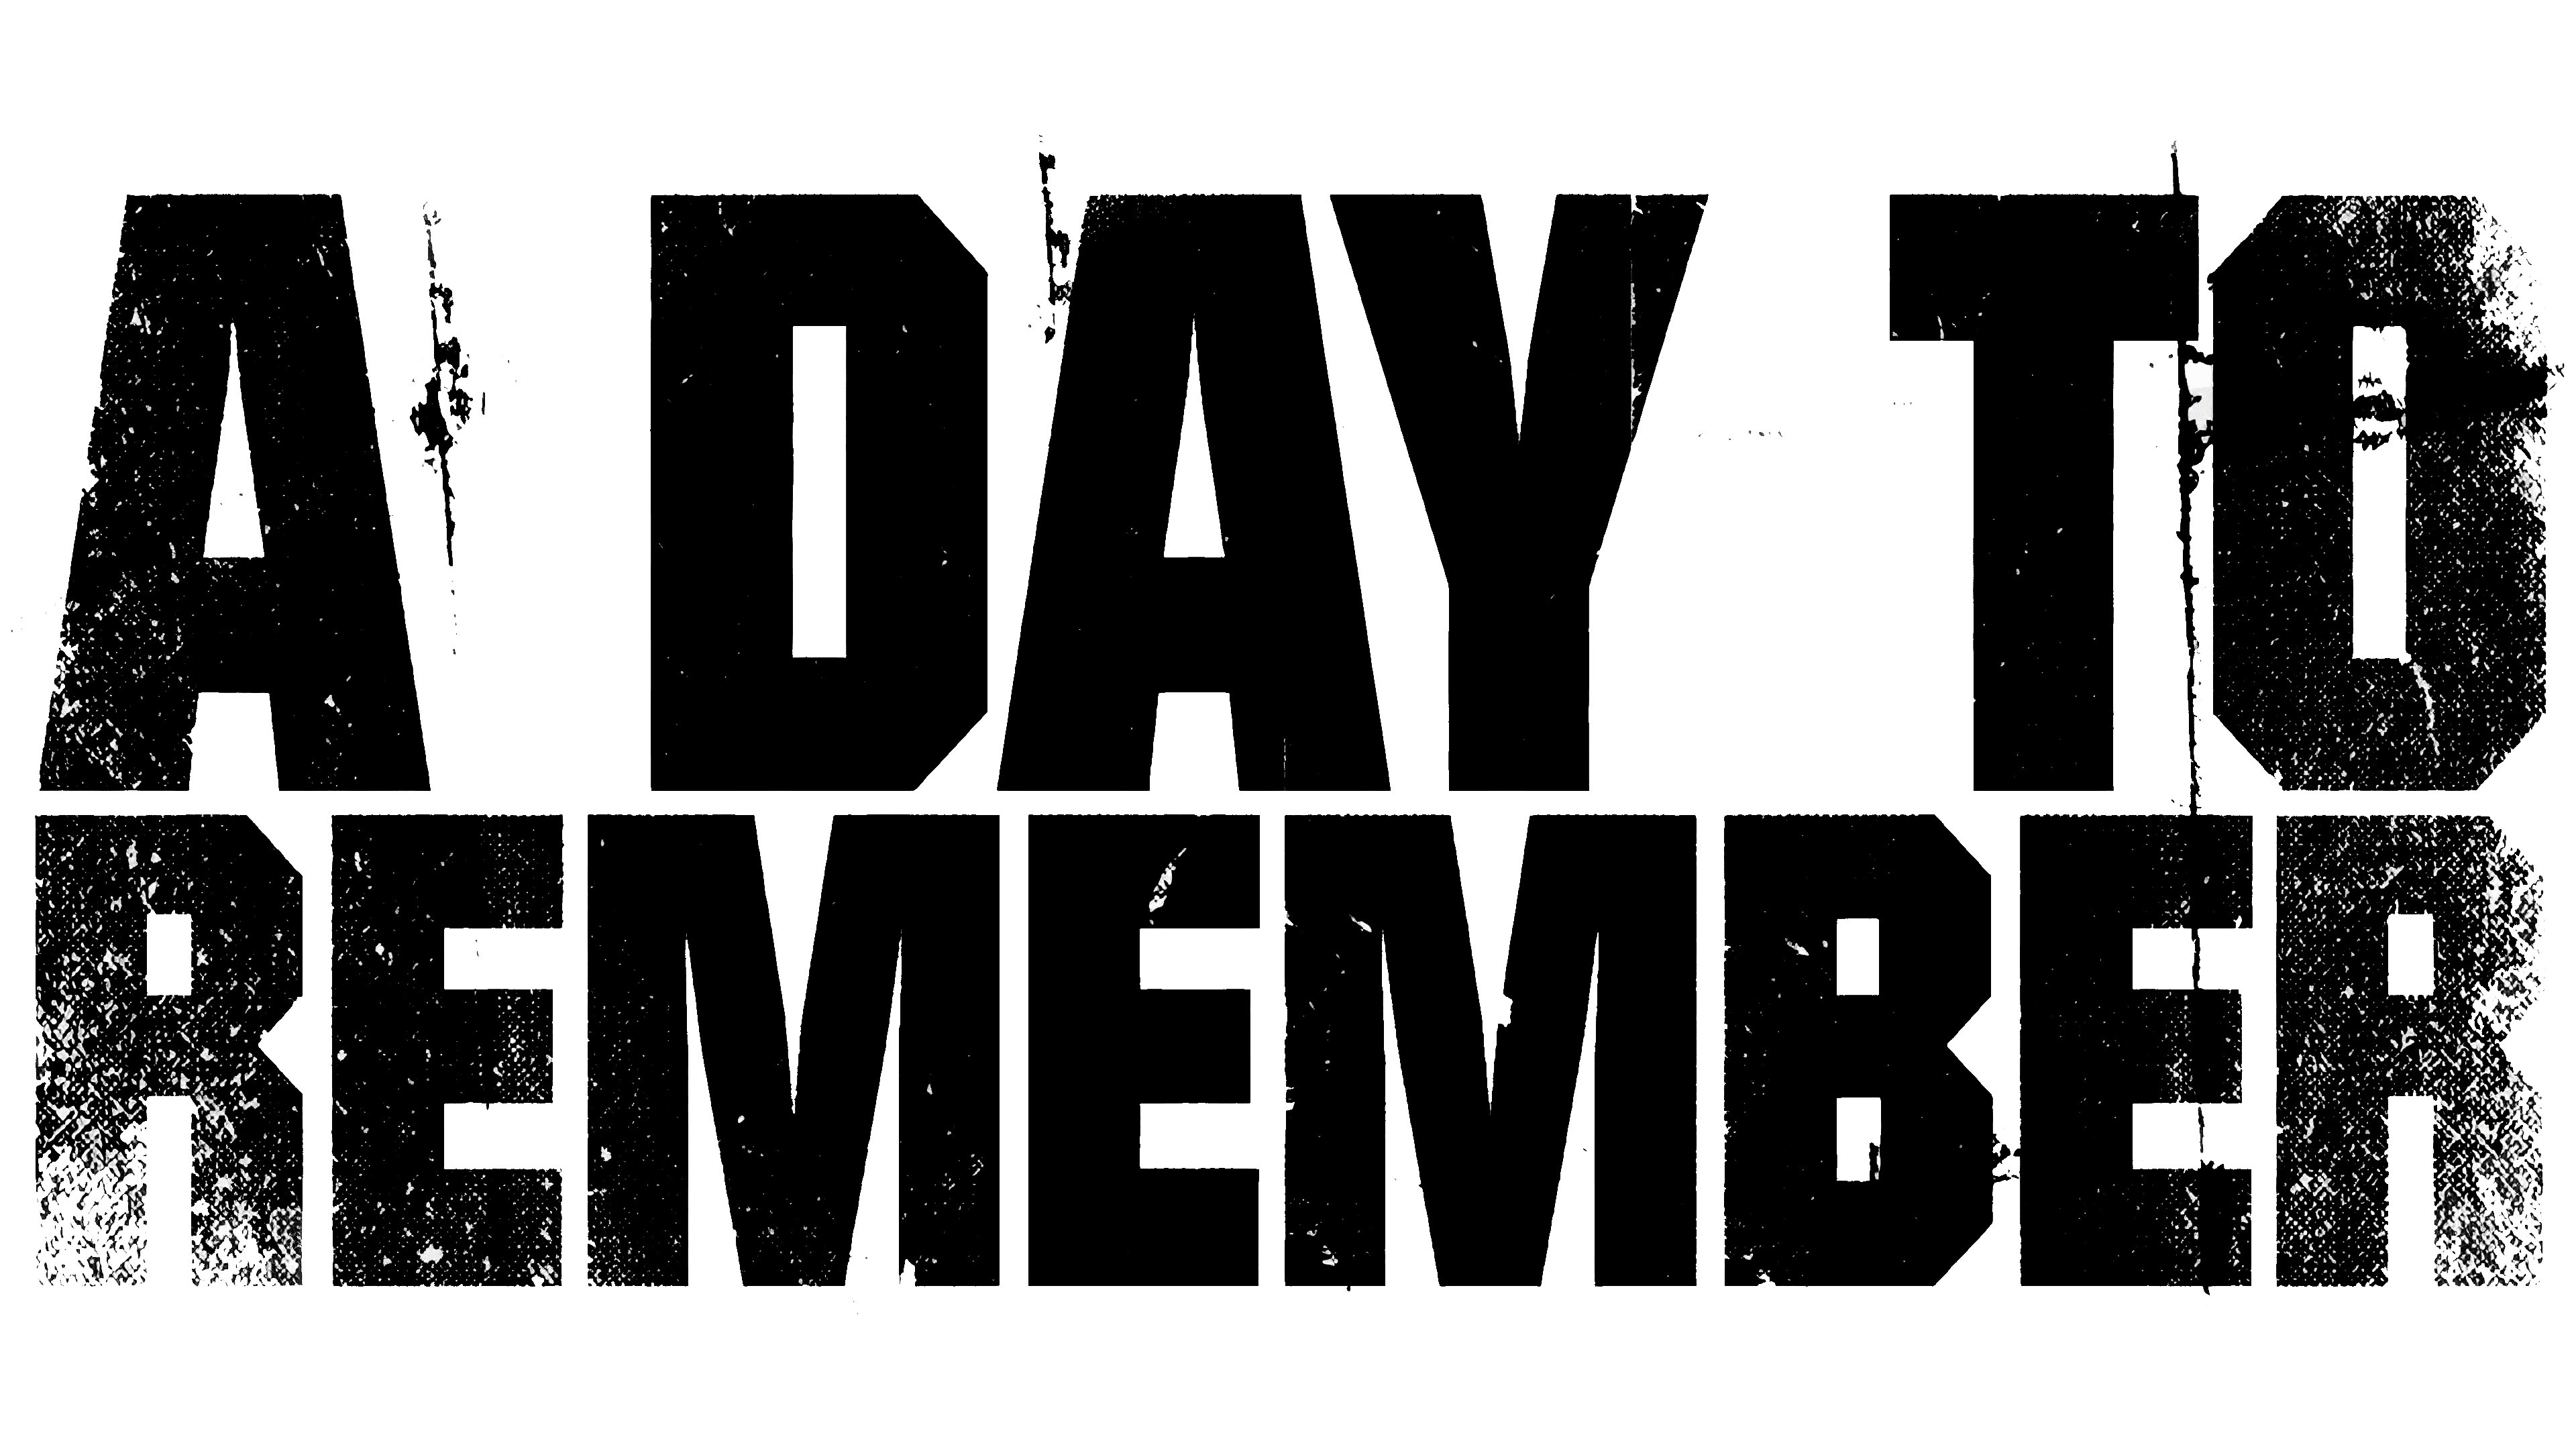 A Day to Remember Logo, symbol, meaning, history, PNG, brand